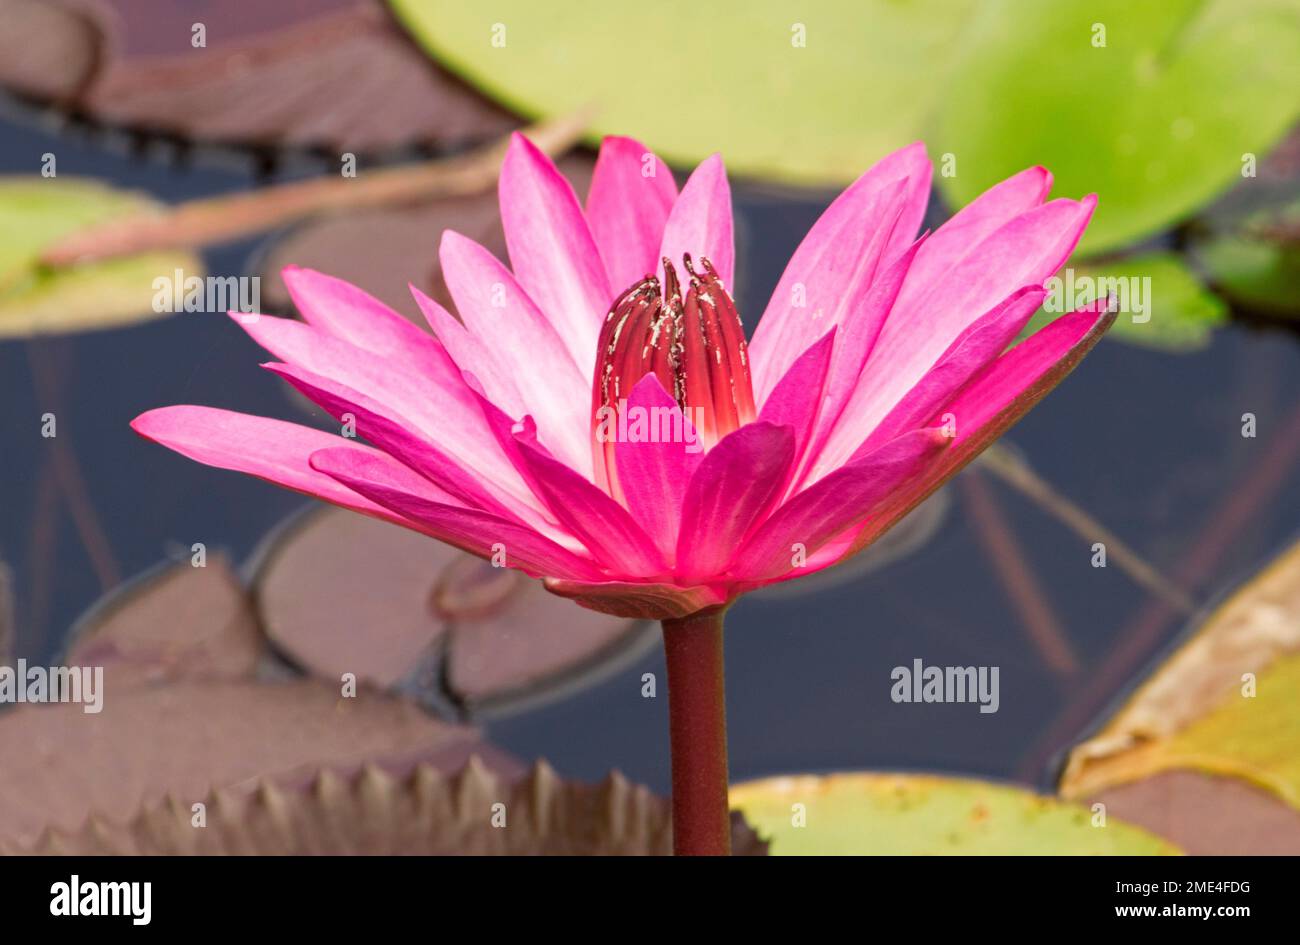 Vivid red flower of waterlily, Nymphea species, an aquatic plant against background of green lily leaves and dark water, in Australia Stock Photo